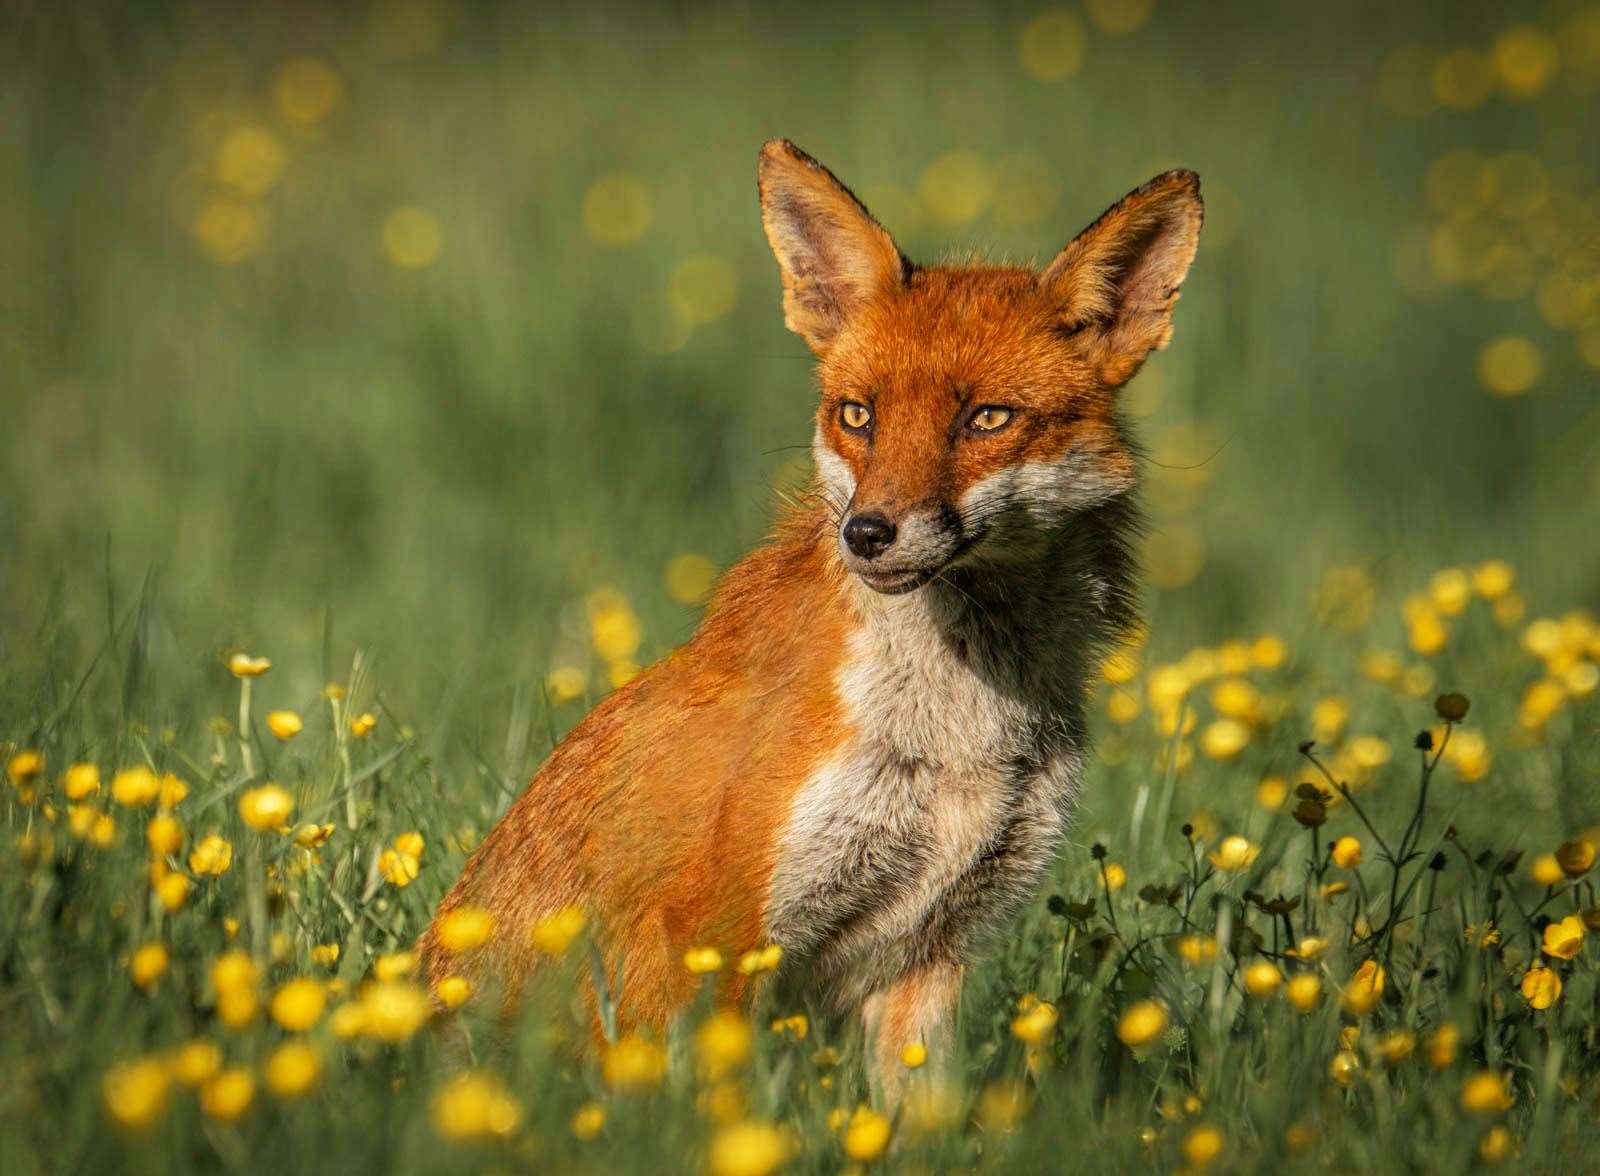 It is assumed the dead foxes were poisoned. Stock image